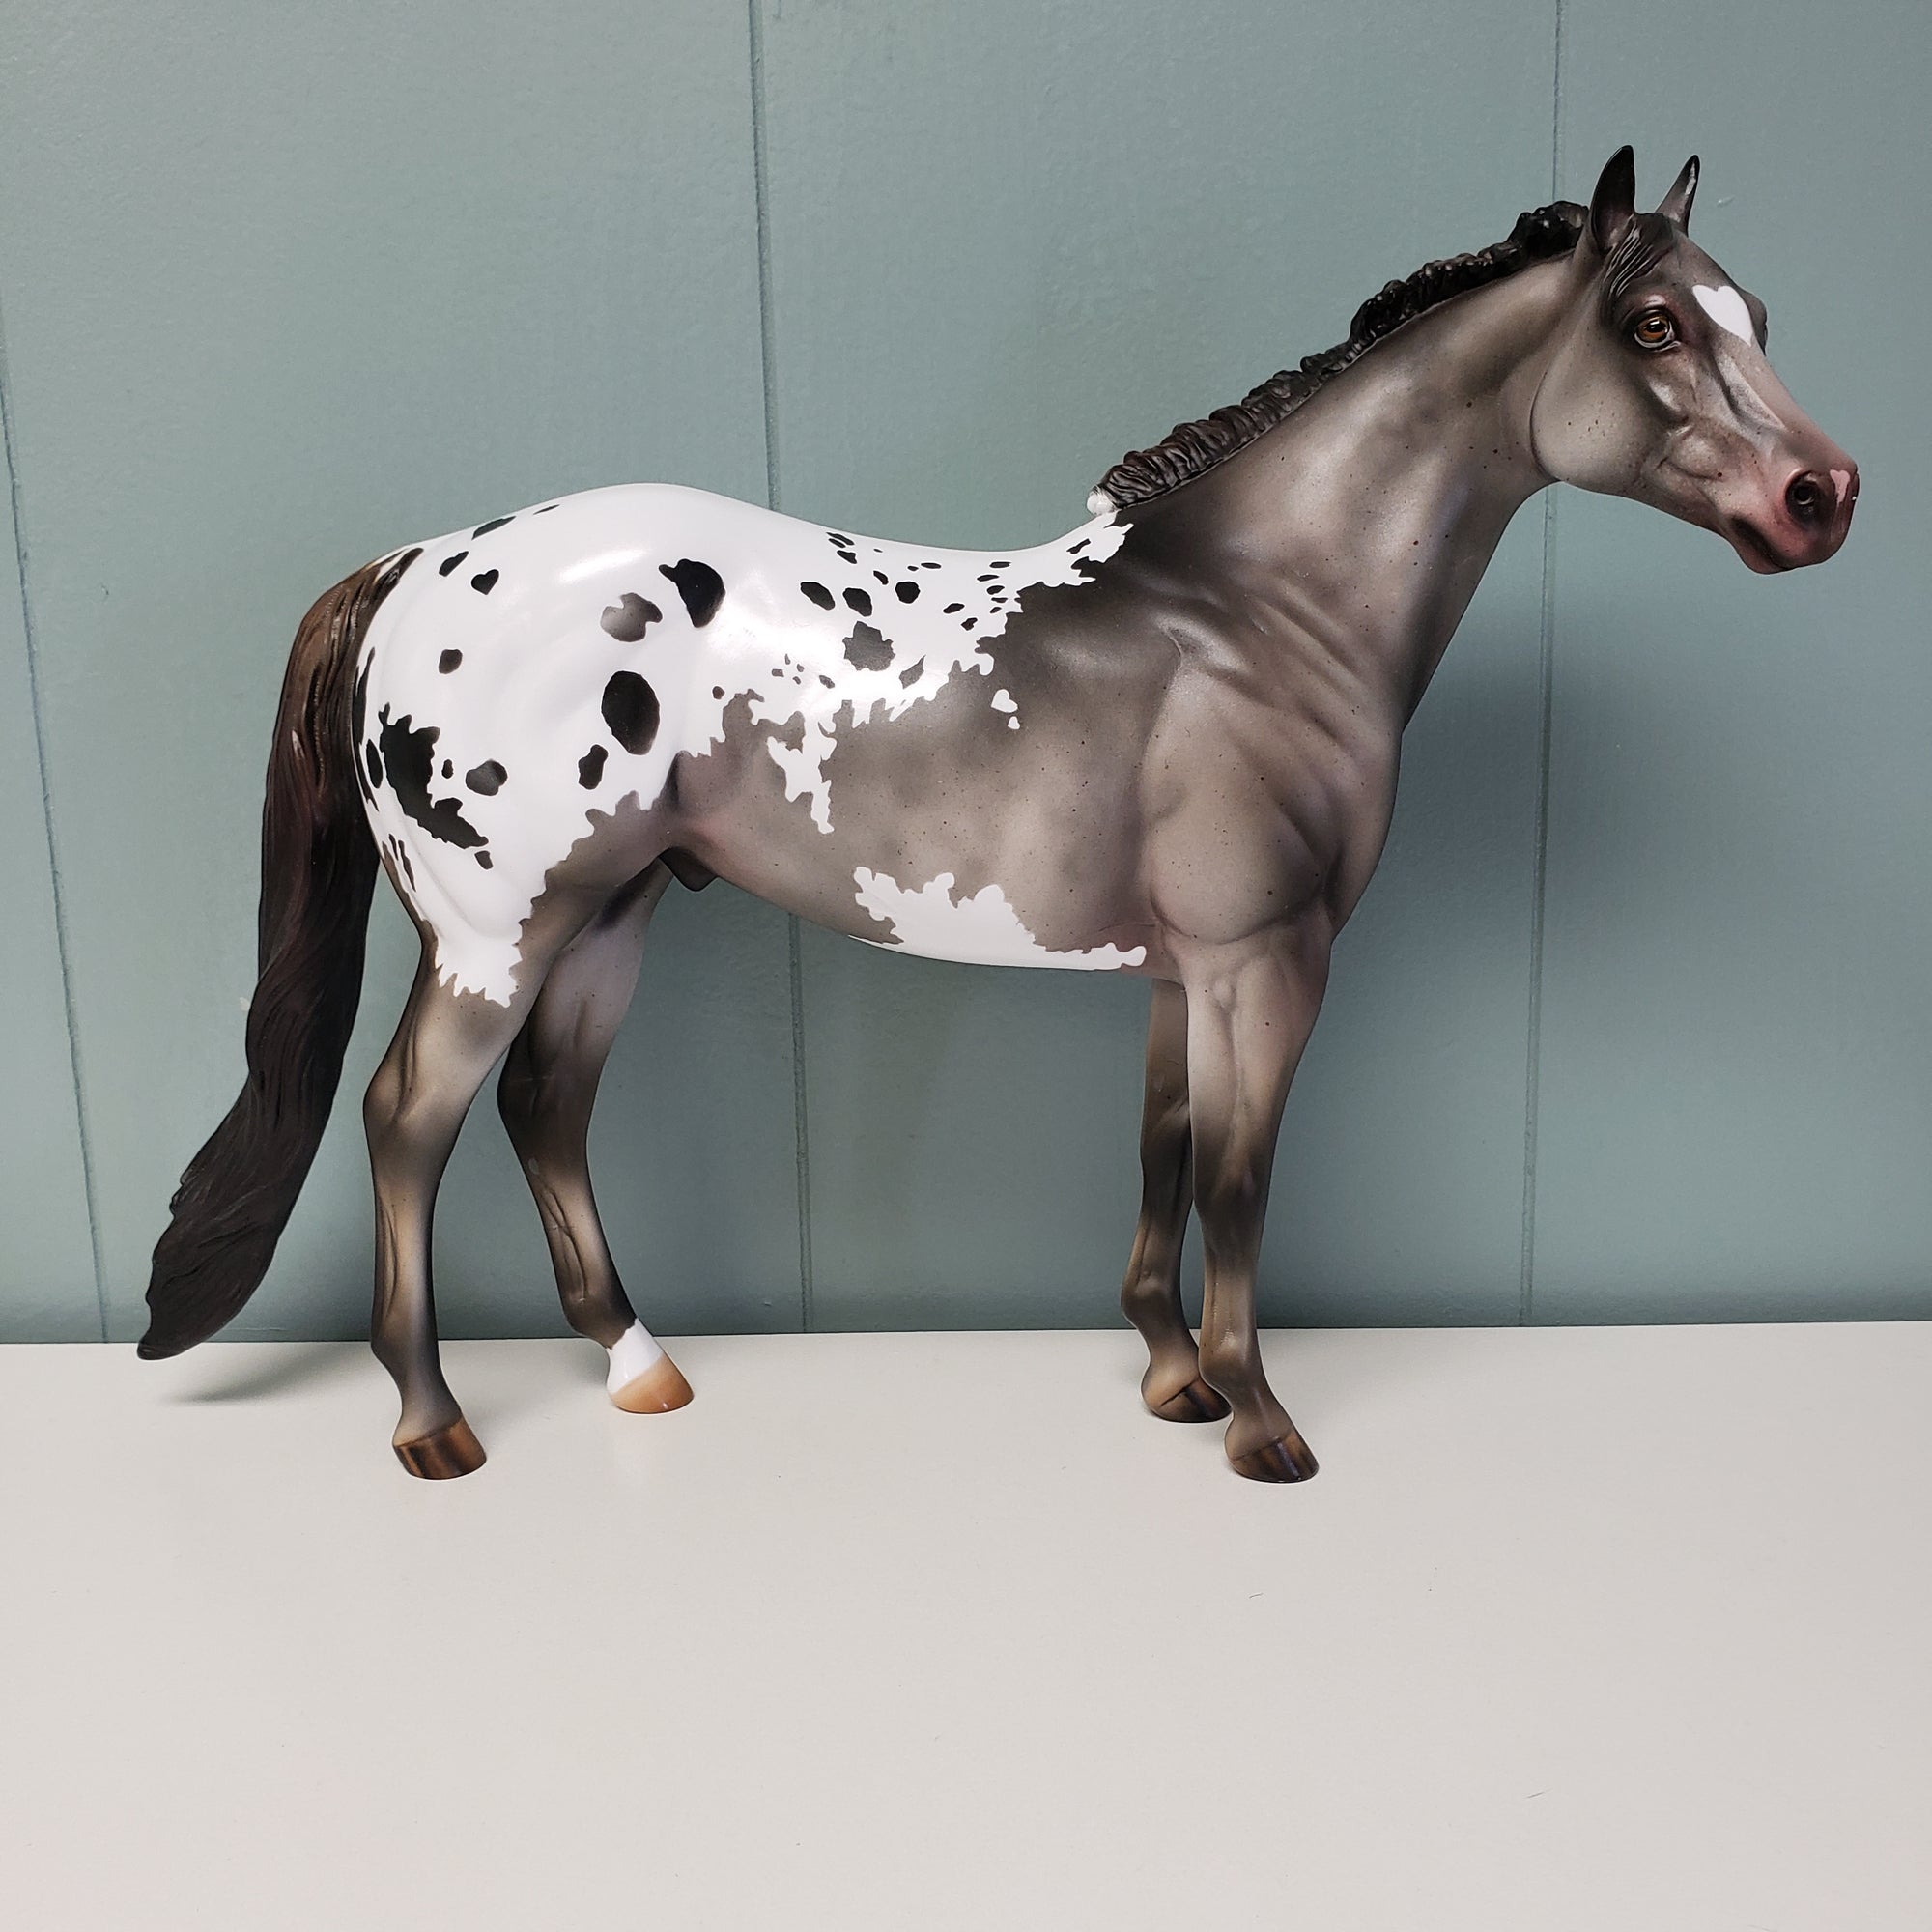 Thinking of You LE 5 Appaloosa Ideal Stock Horse by Julie Keim Val24